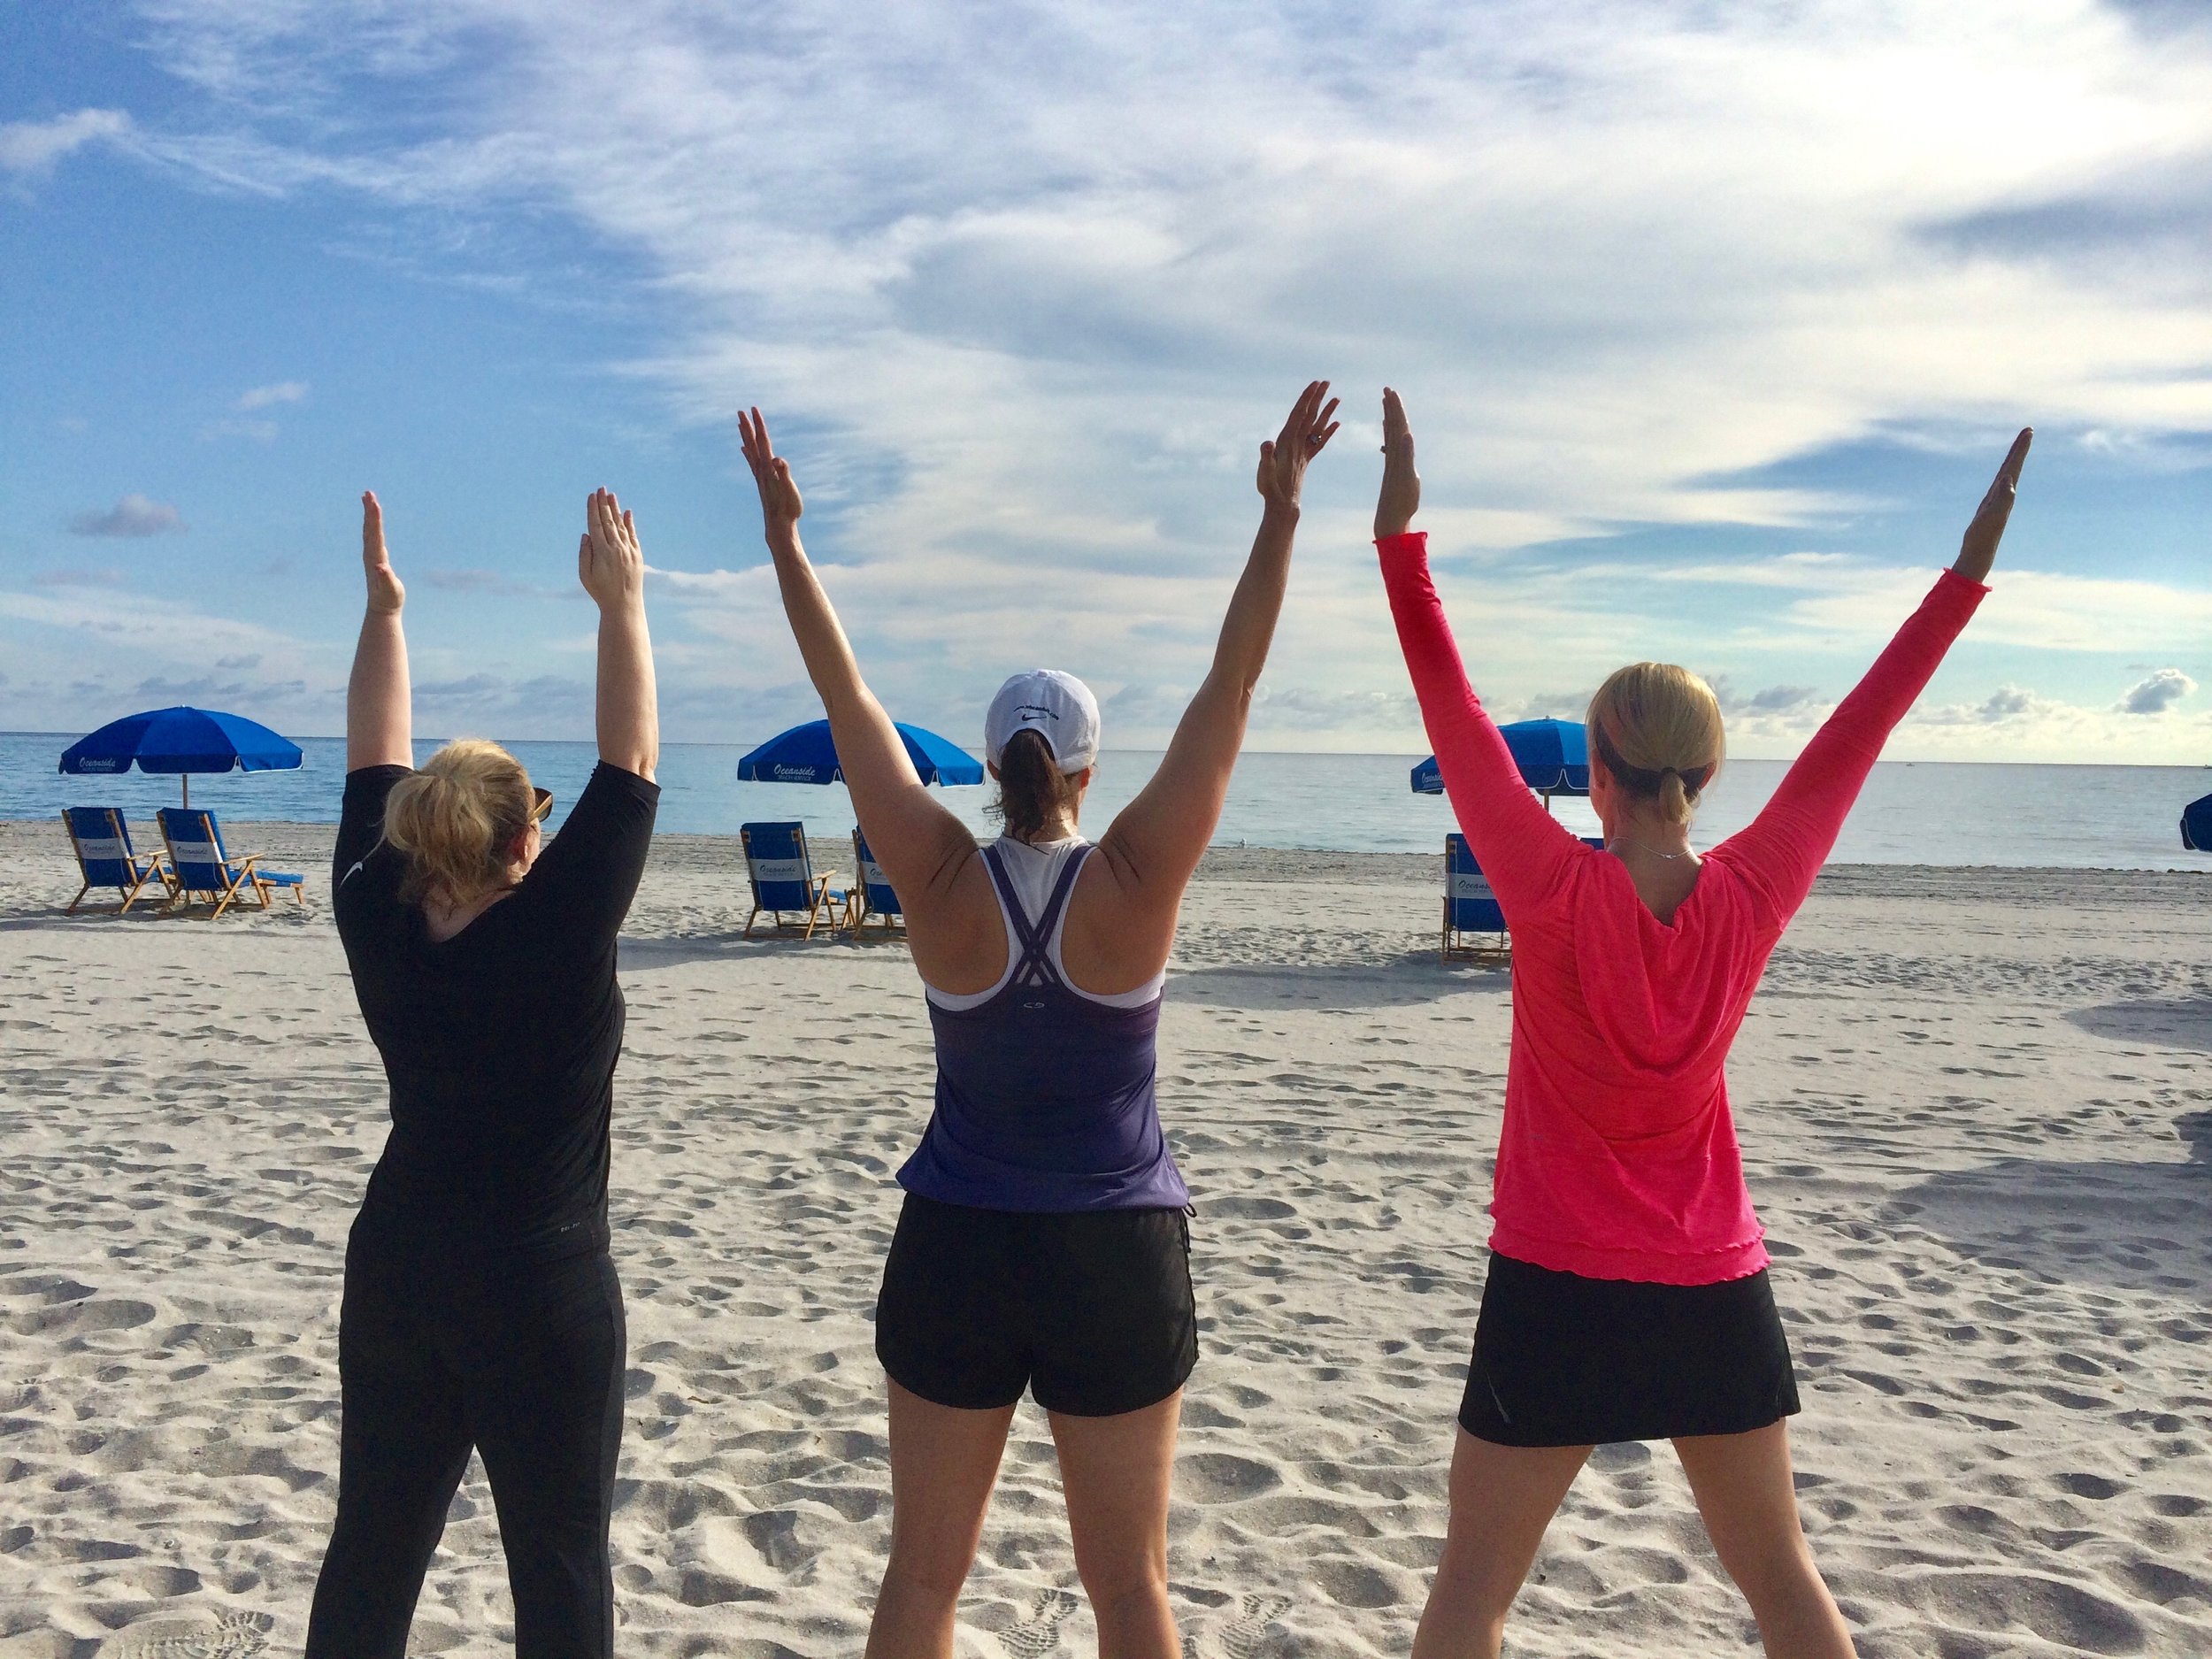 Clients celebrate their retreat with arms in the air.